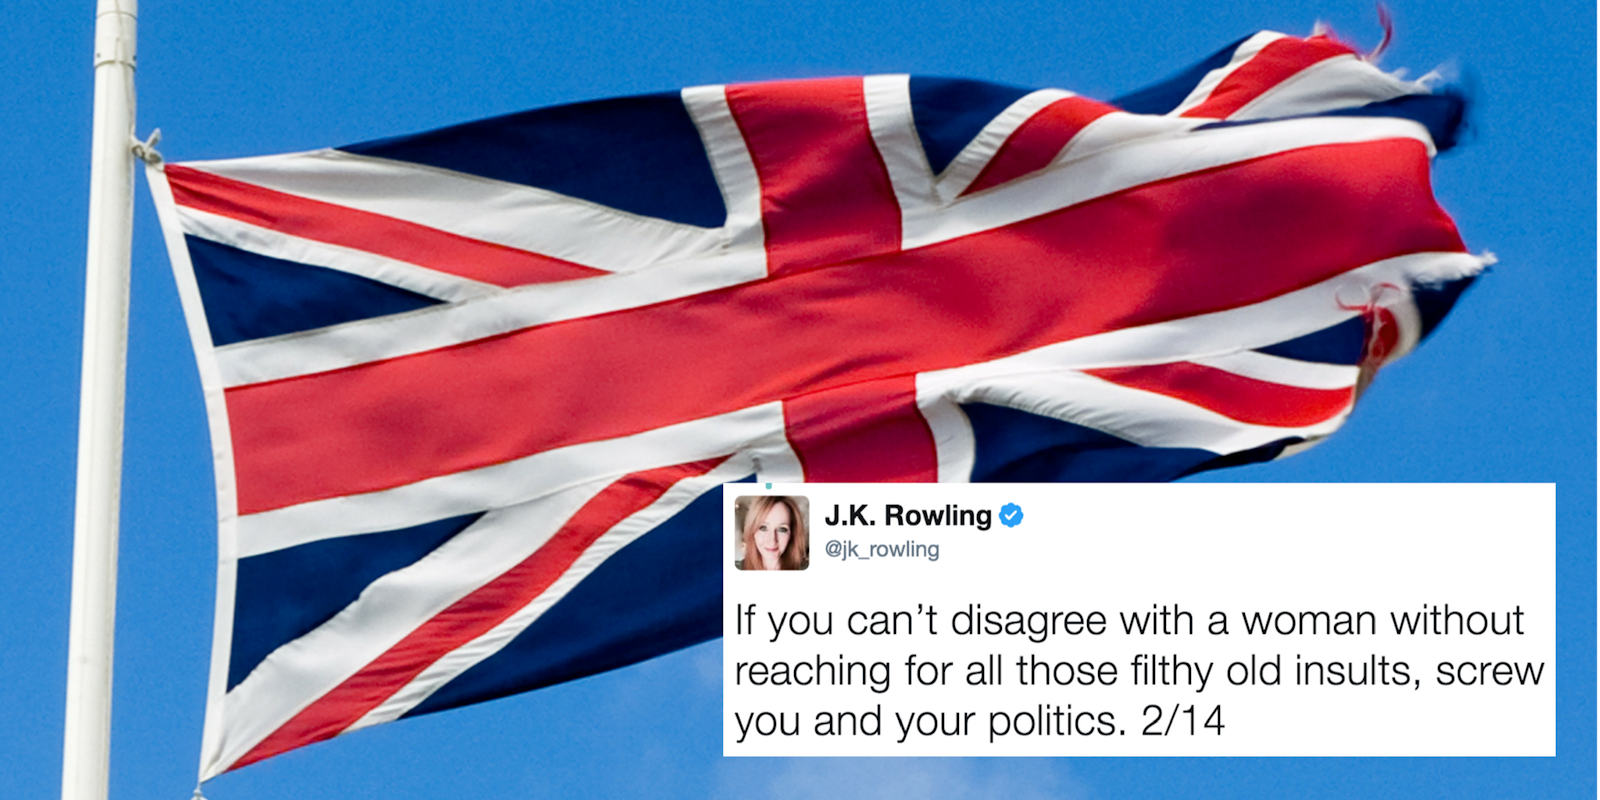 The UK flag with a tweet from J.K. Rowling superimposed